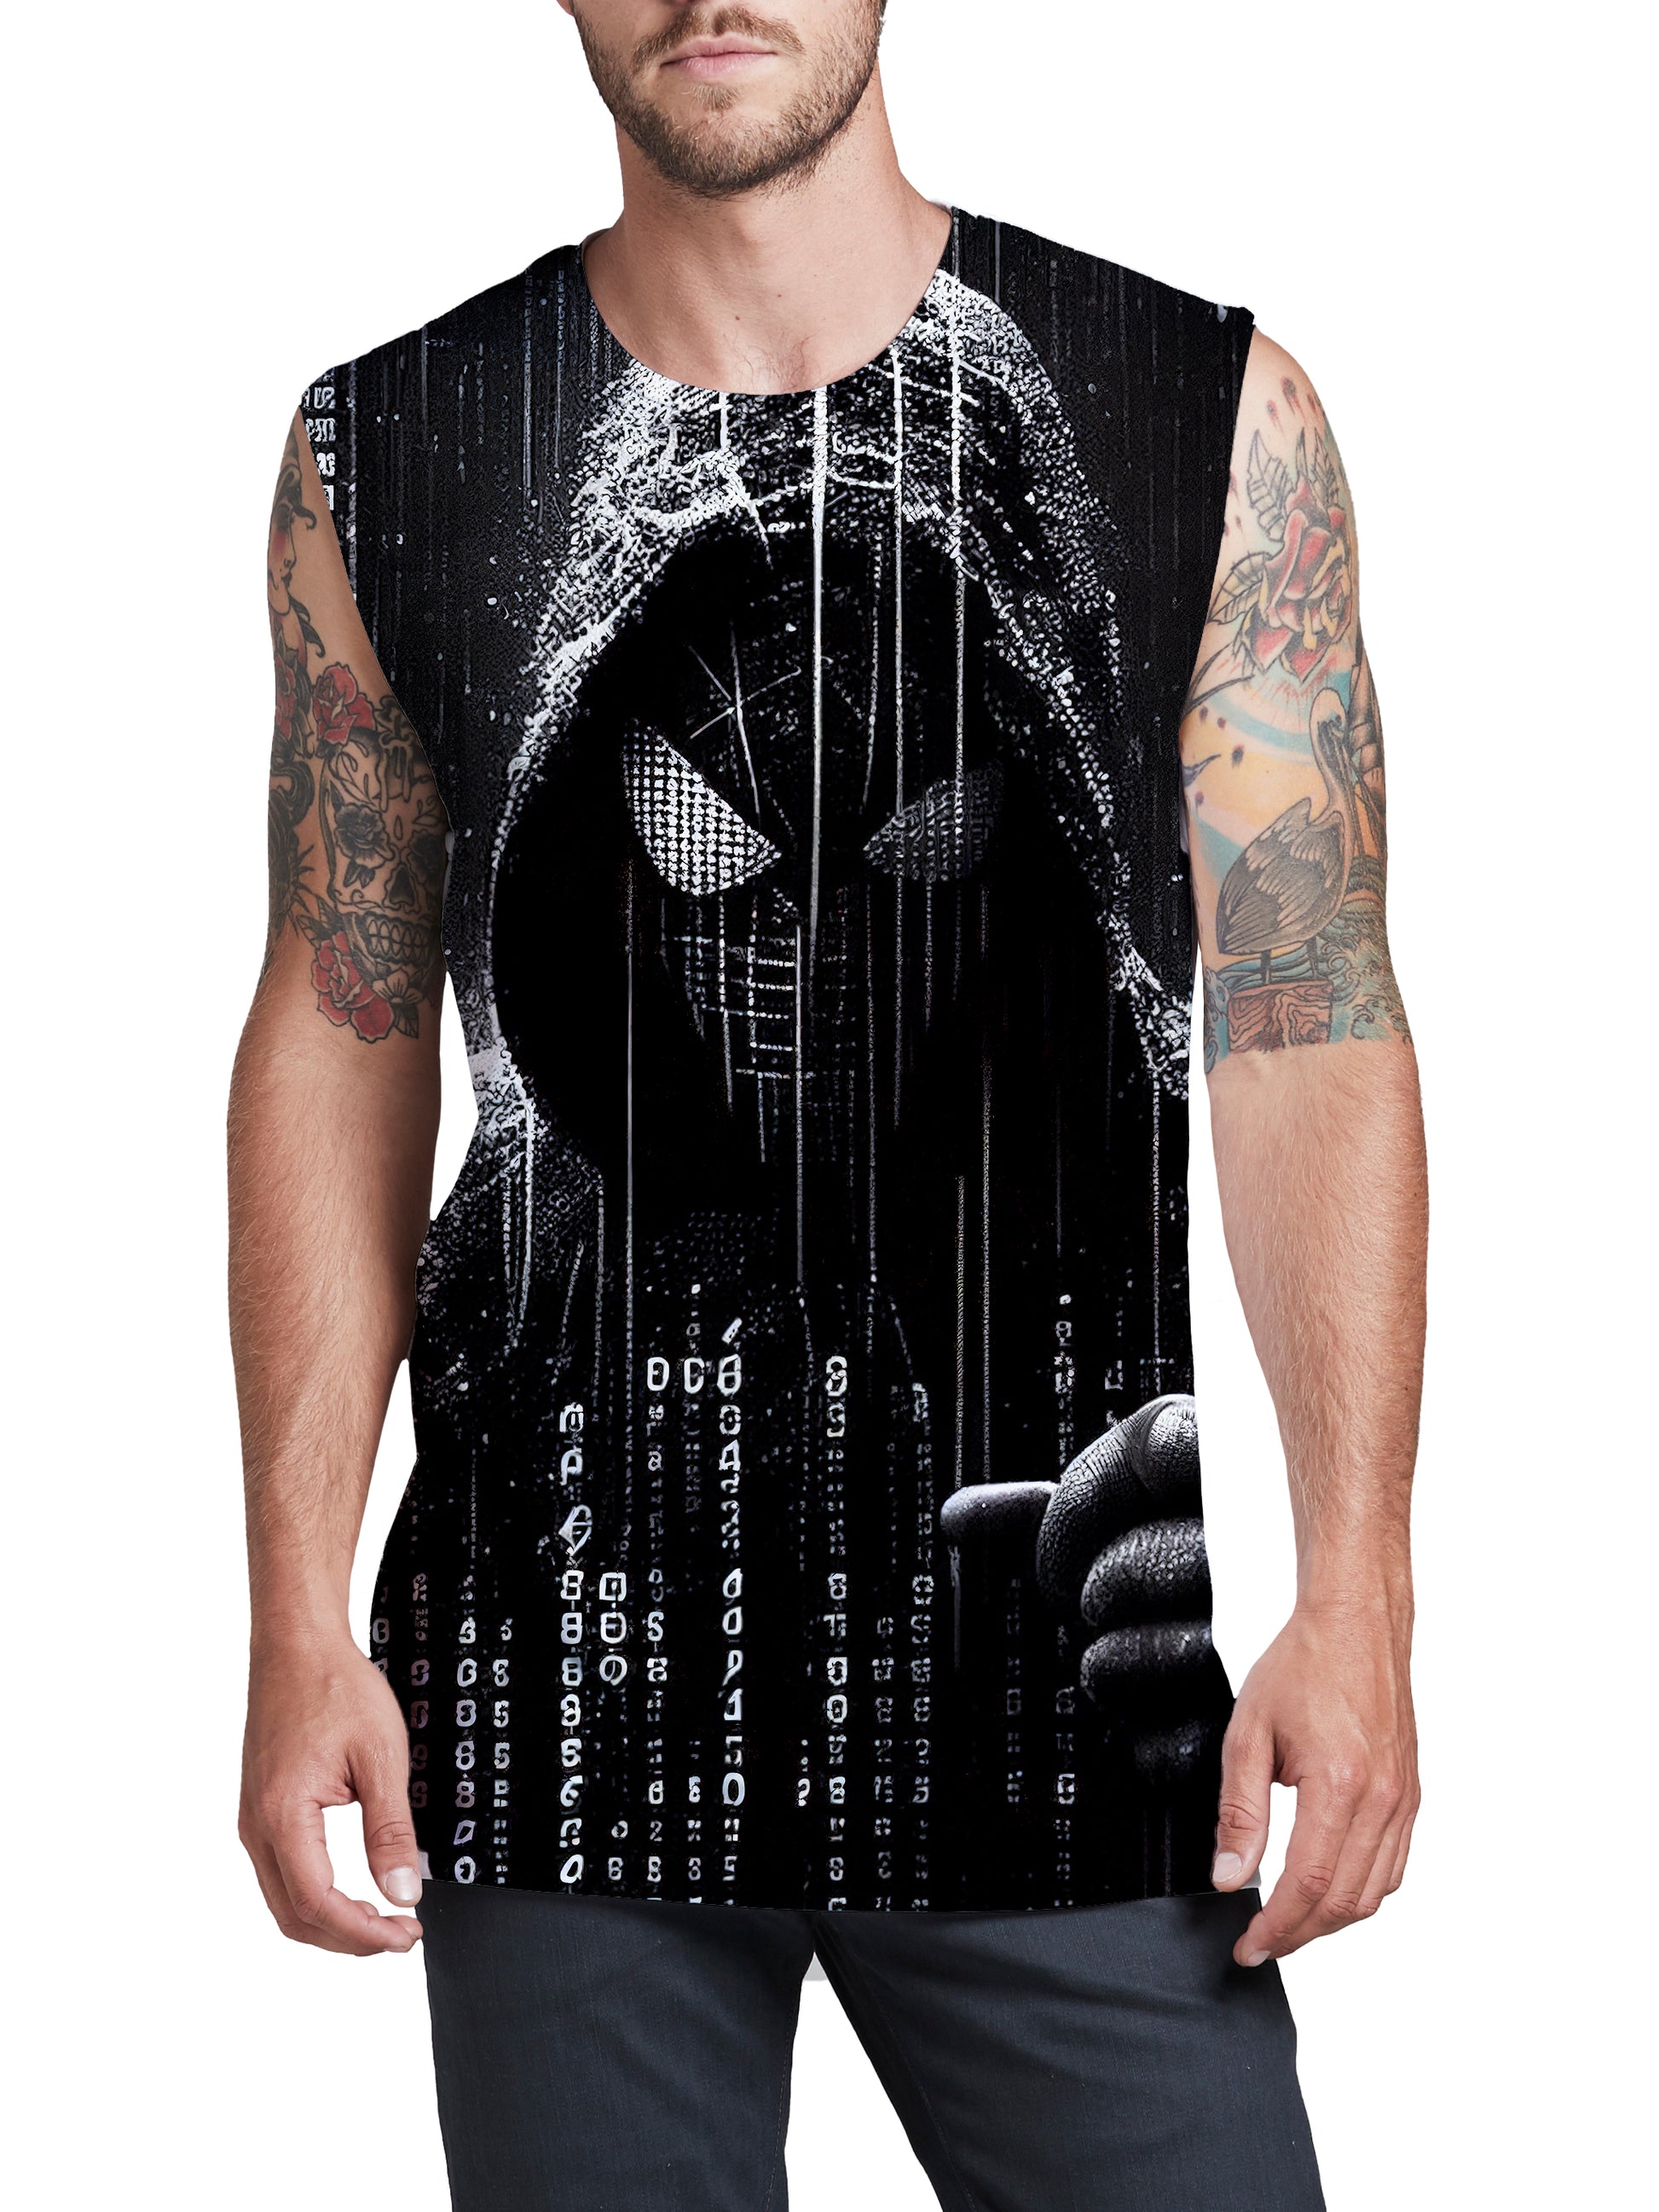 Spidey Existence Men's Muscle Tank, iEDM, | iEDM